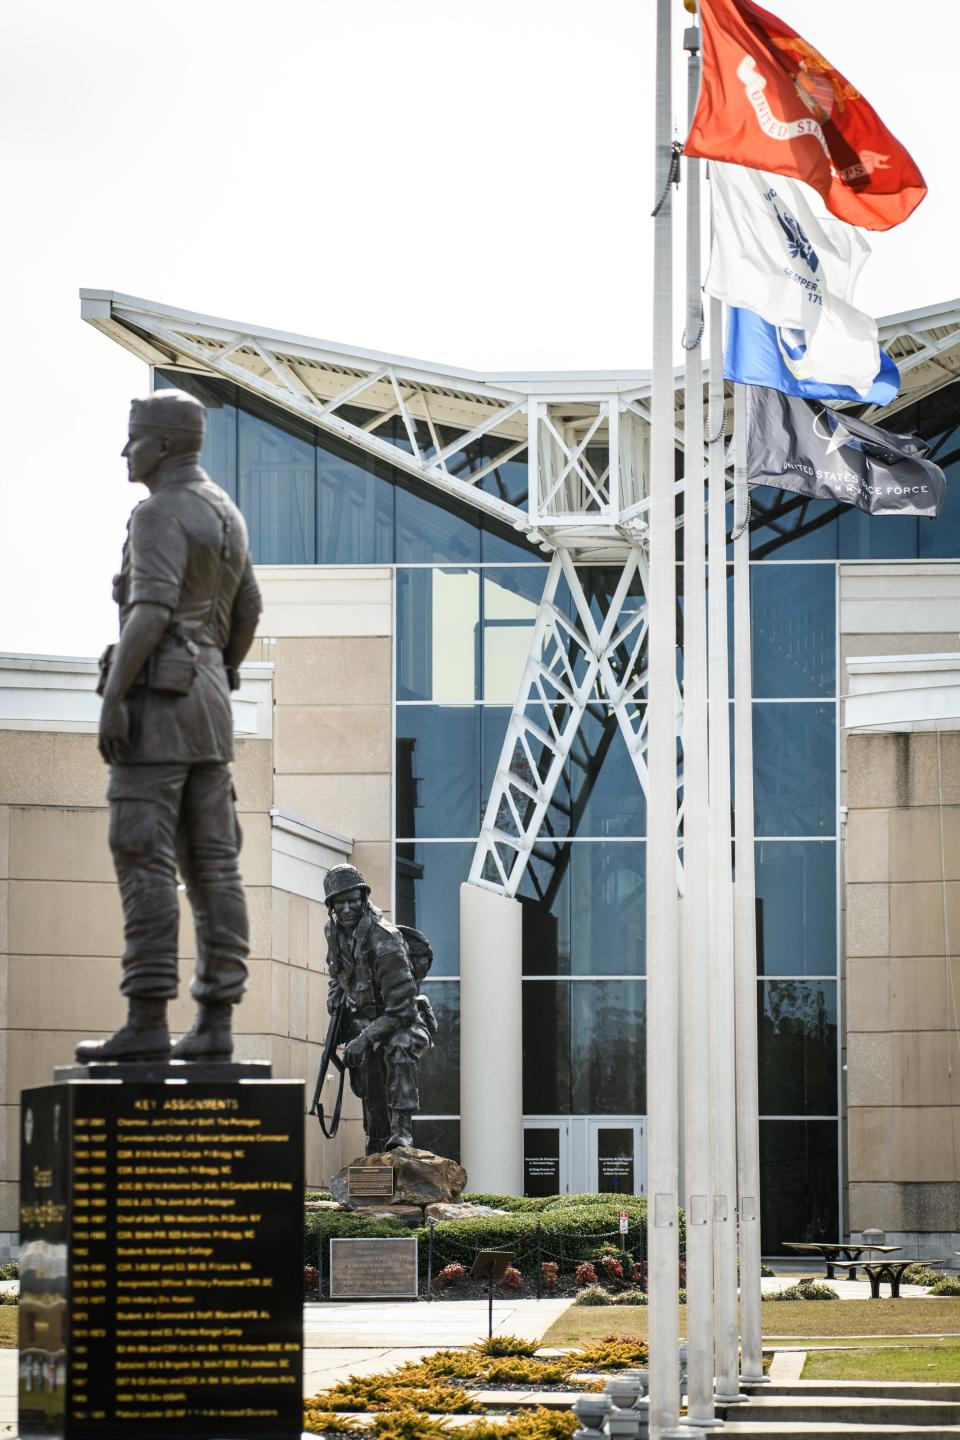 Gen. Hugh Shelton and Iron Mike statues in front of the Airborne and Special Operations Museum.